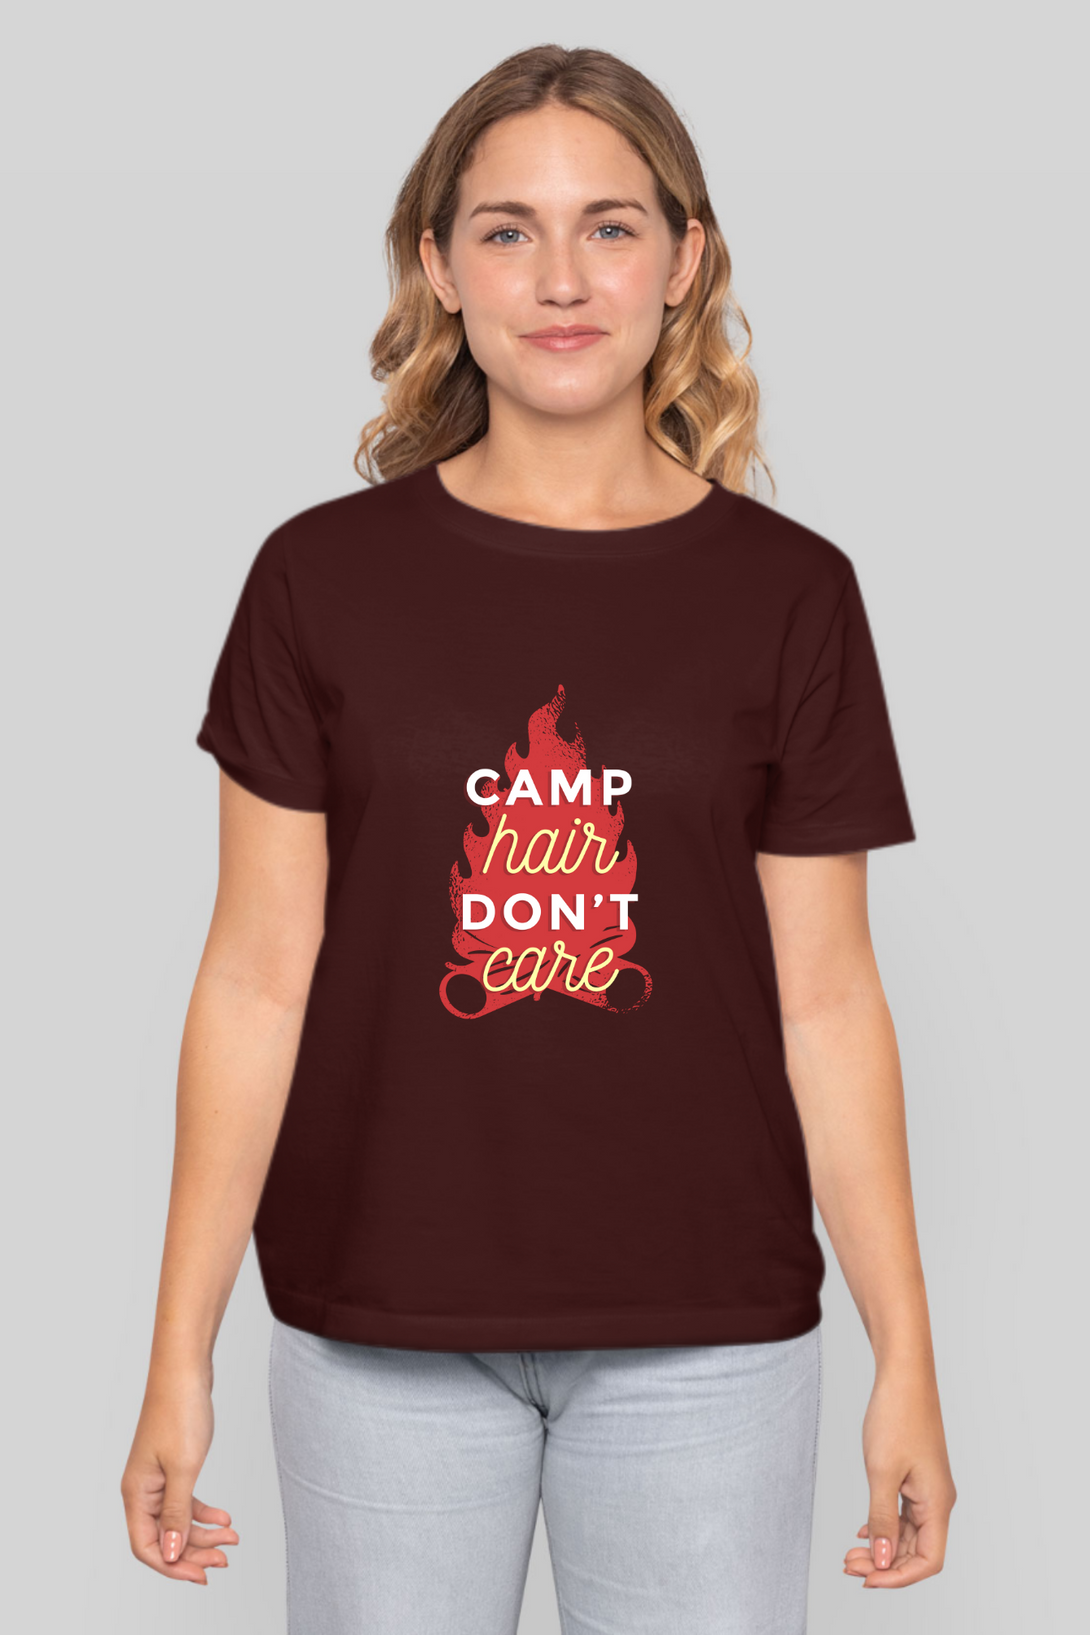 Camping Vibes Printed T-Shirt For Women - WowWaves - 8